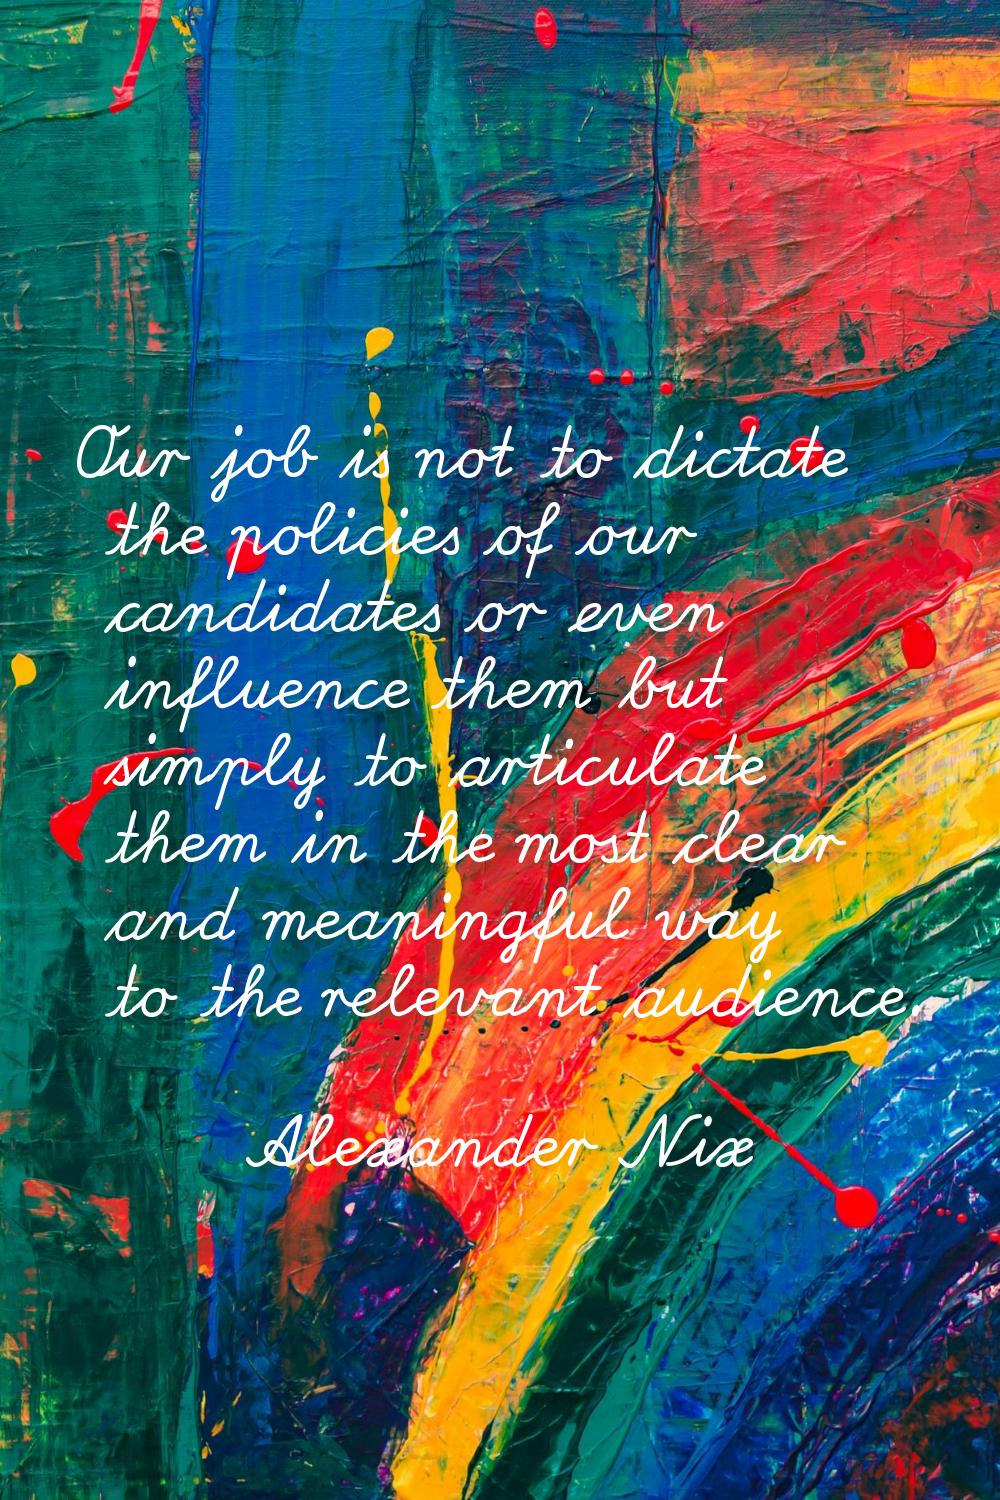 Our job is not to dictate the policies of our candidates or even influence them but simply to artic